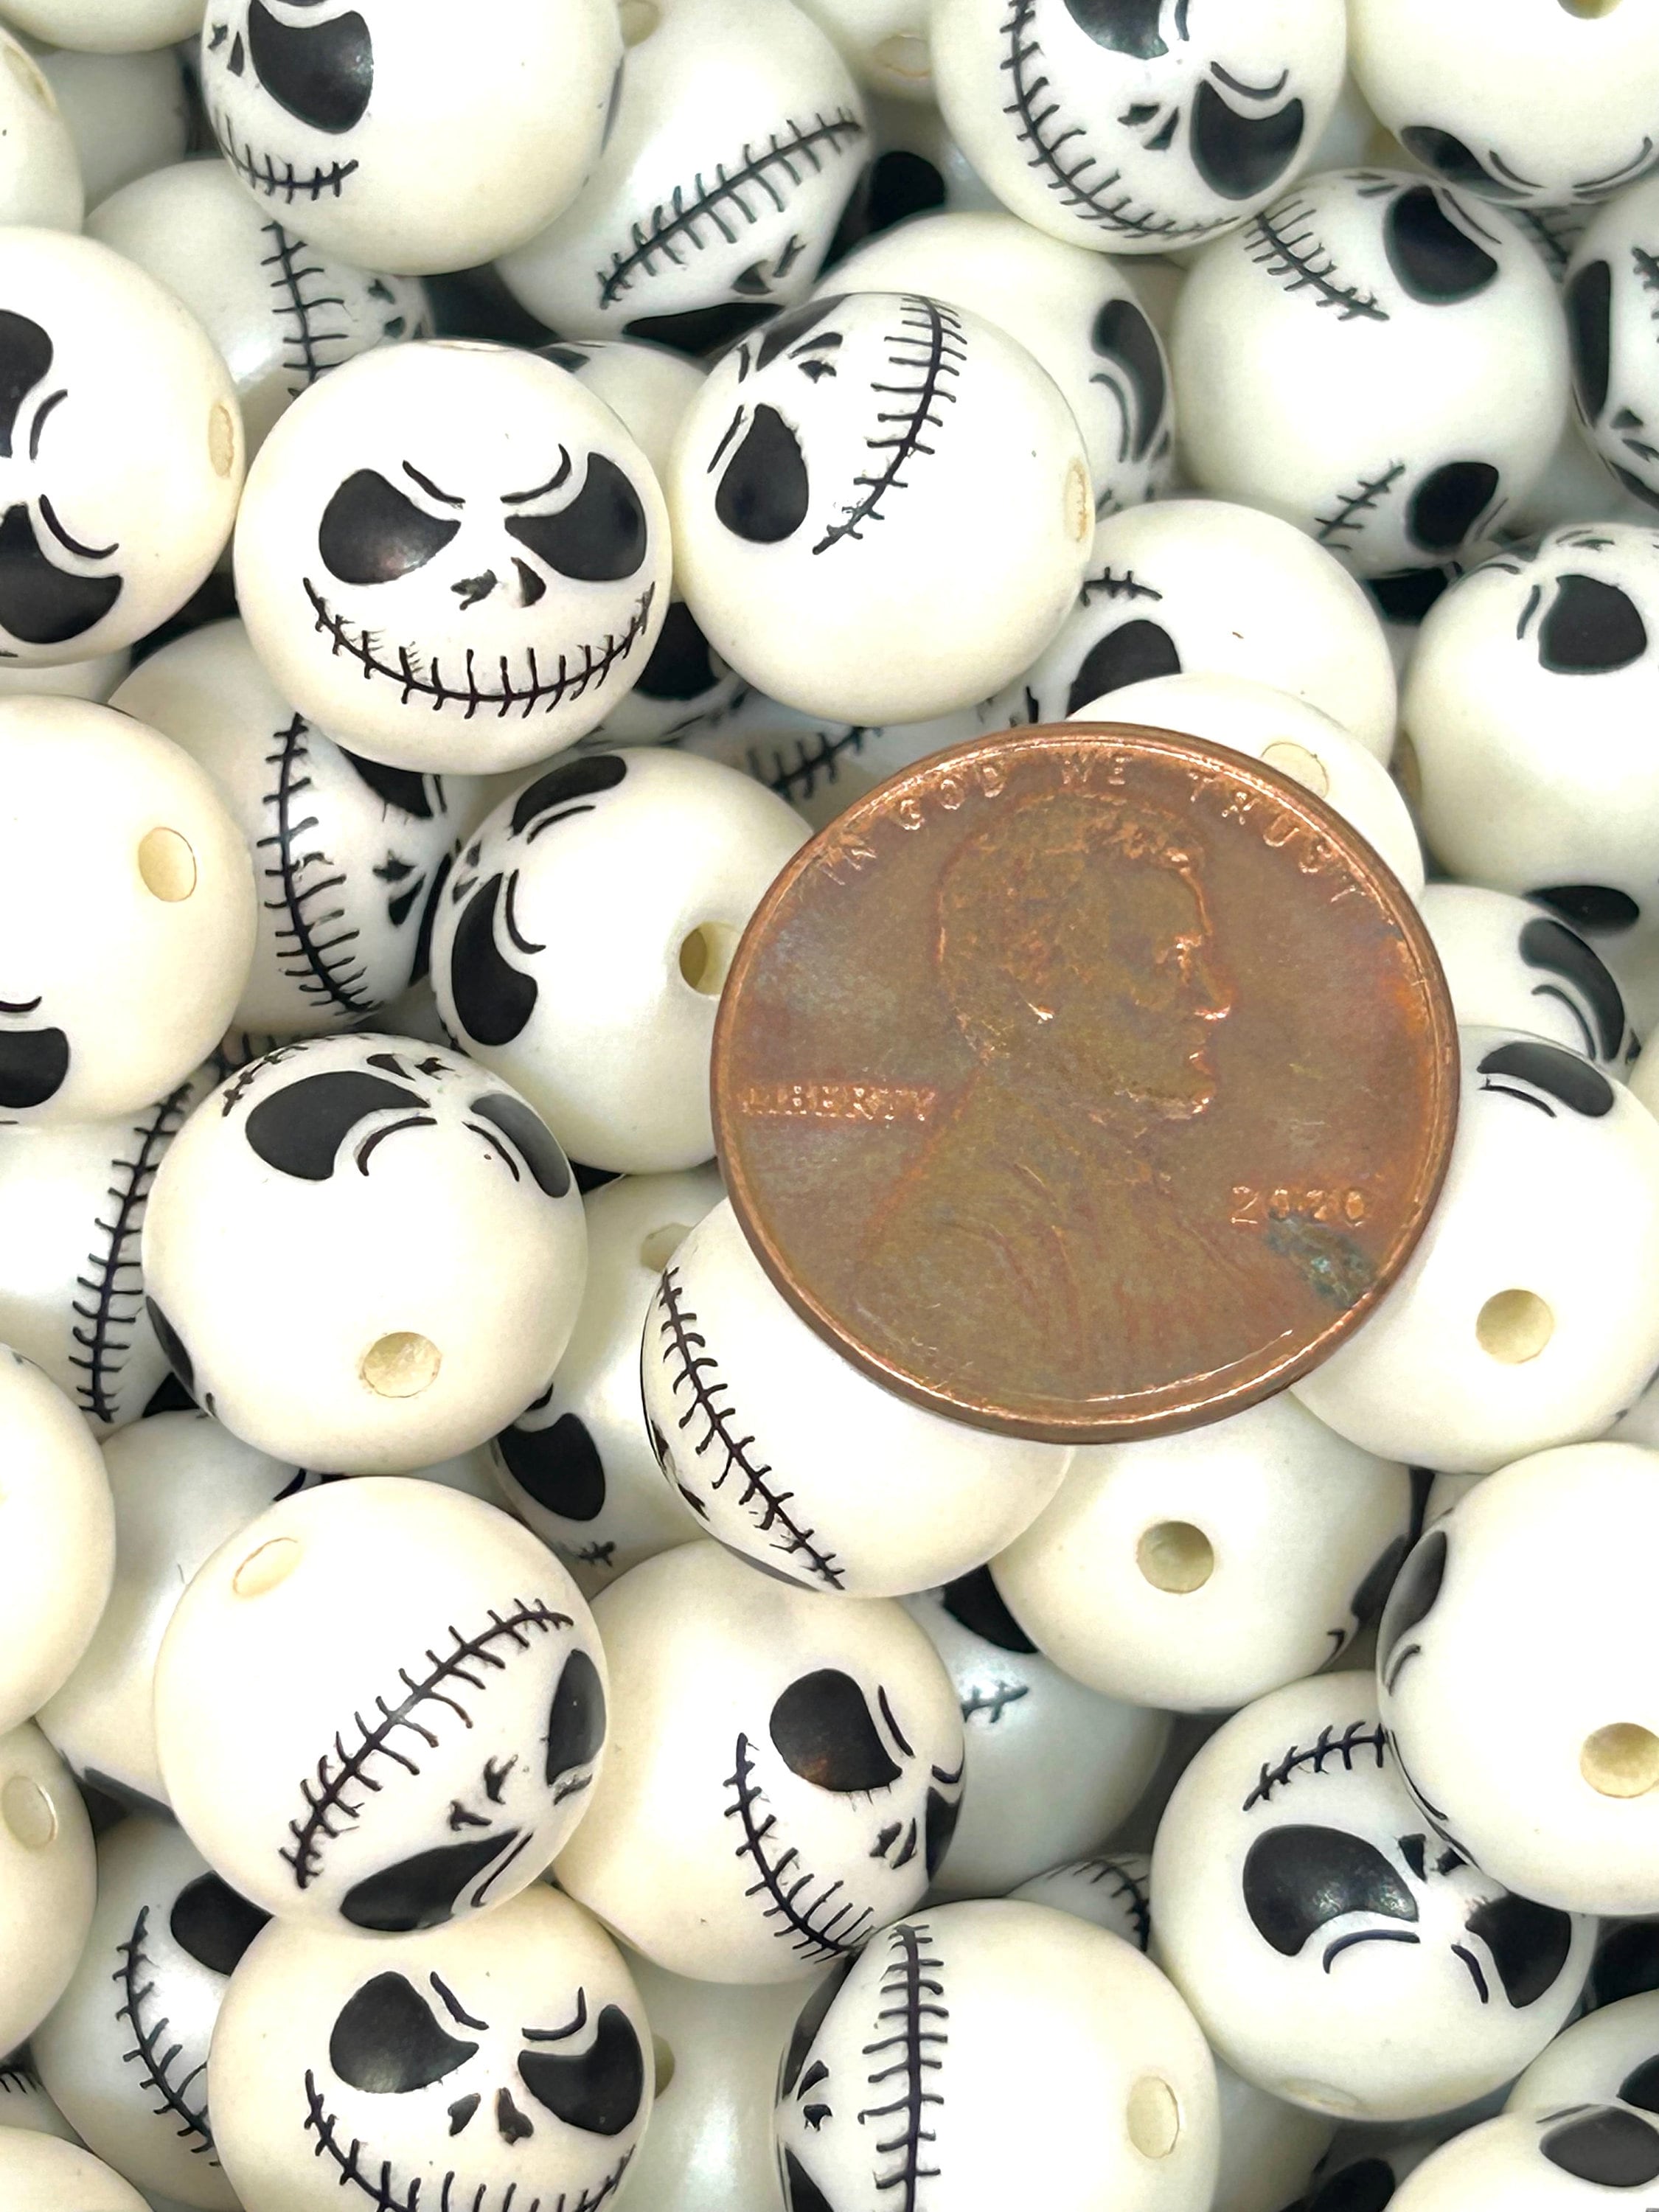 12mm Jack the Skeleton Beads - Ideal for Halloween Jewelry Creations